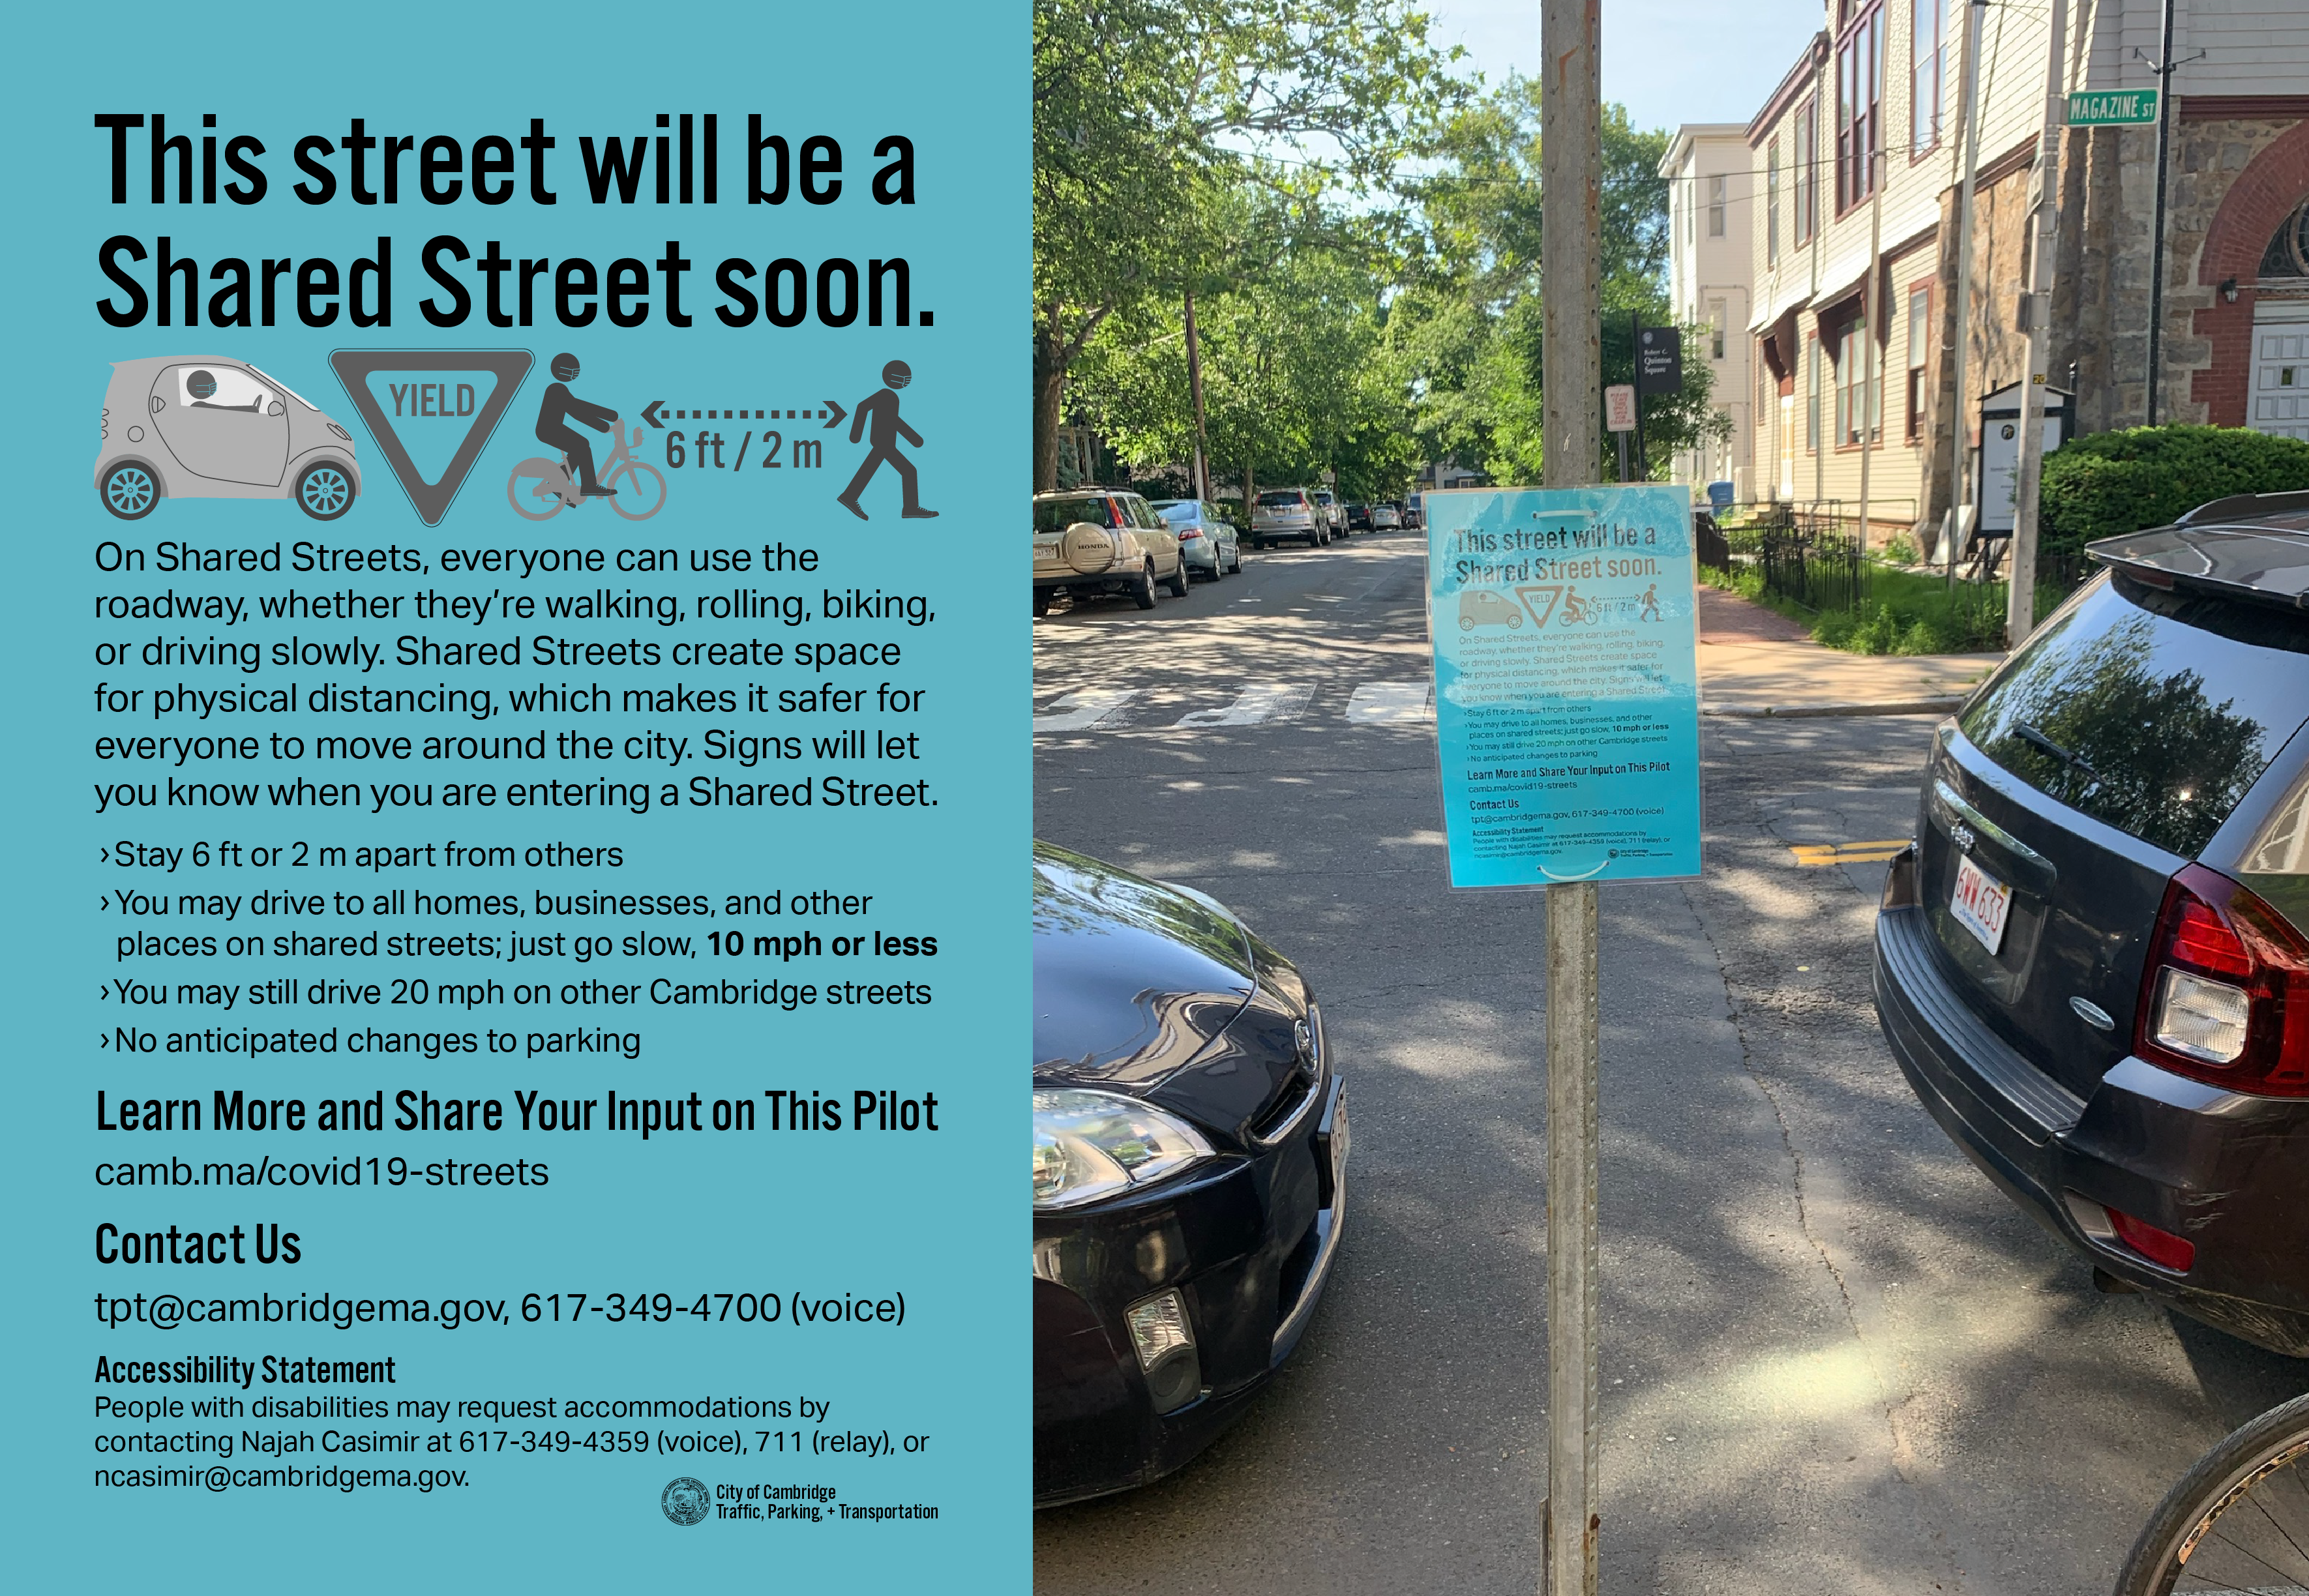 "Shared Streets Coming Soon" and a photo of the sign posted on Magazine St.